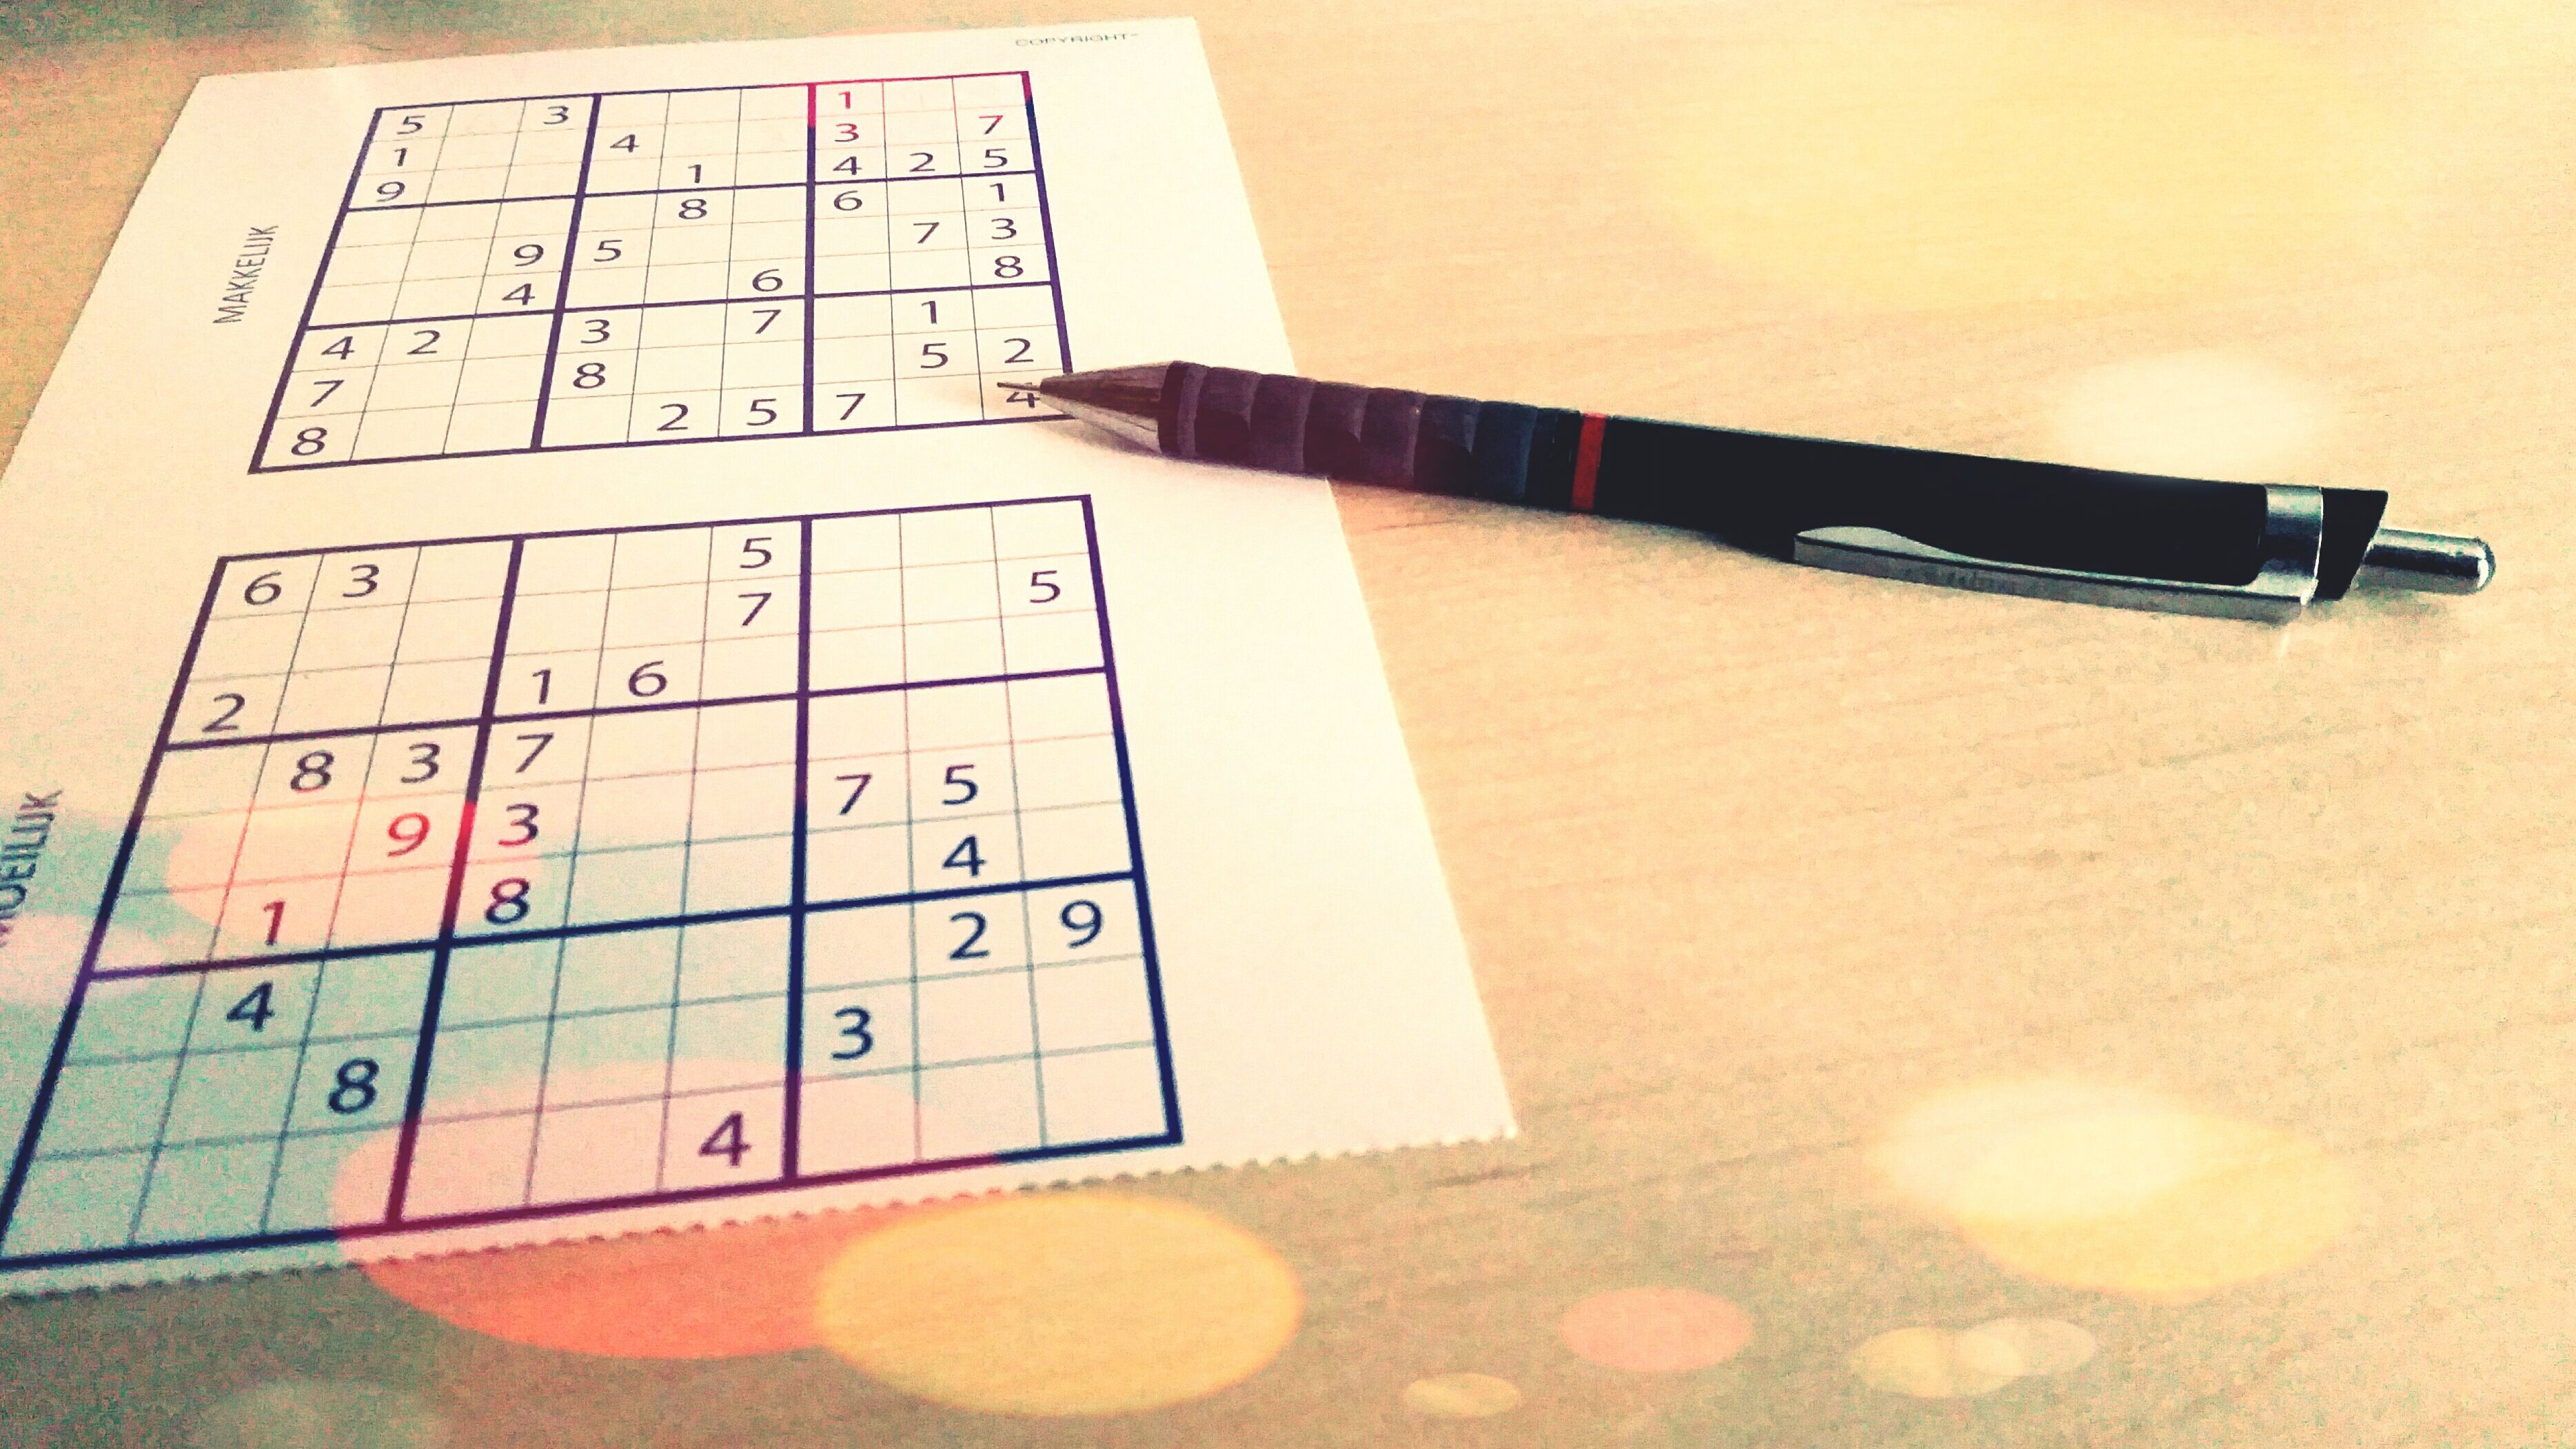 Free Printable Sudoku Puzzles For All Abilities - Printable Sudoku Puzzles Easy #4